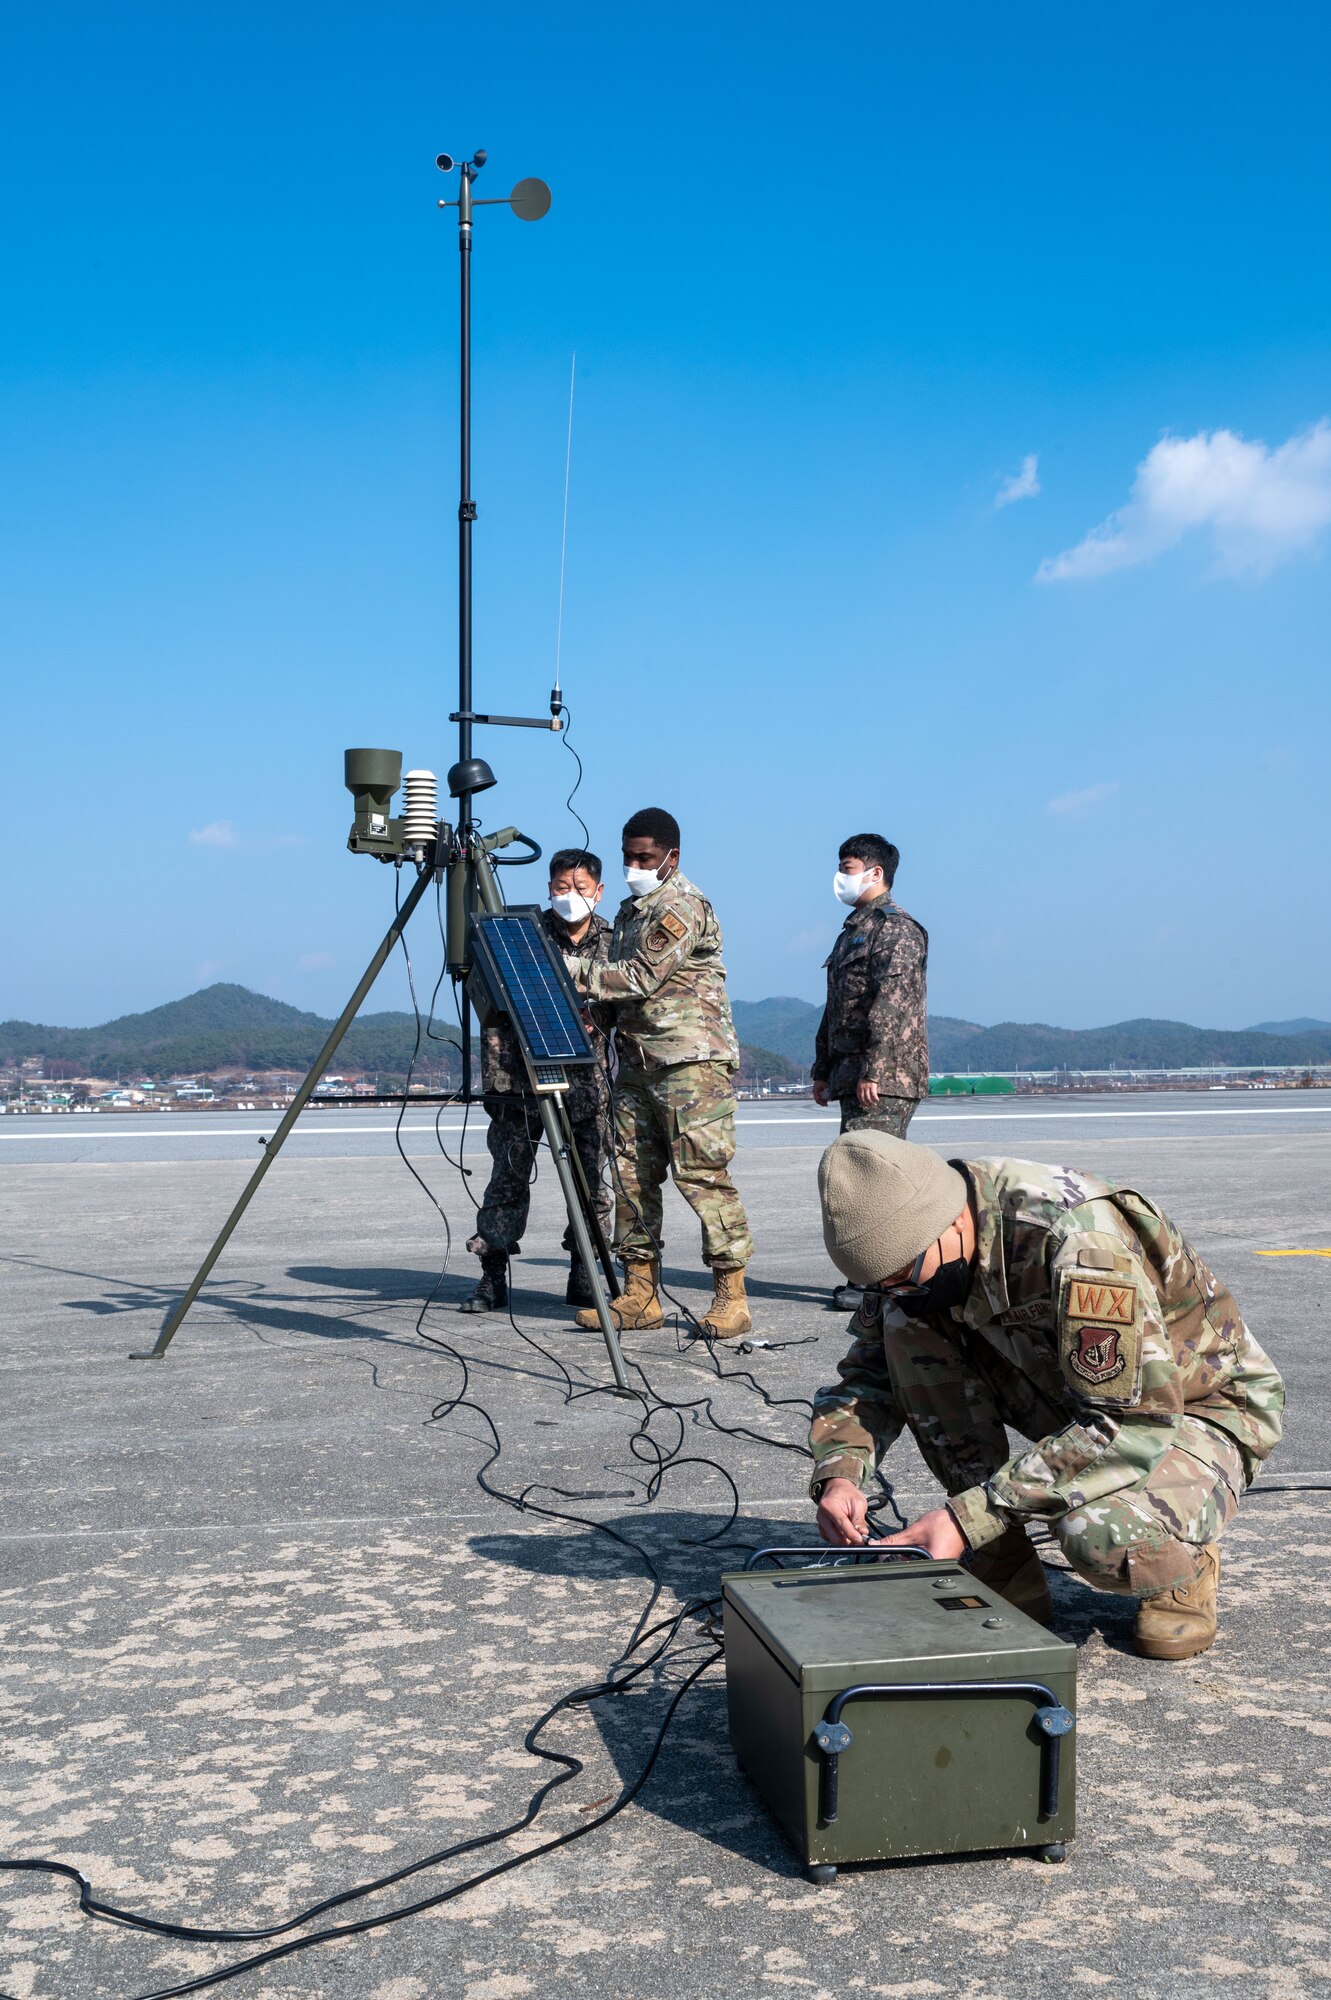 U.S. Air Force Airmen from the 51st Operational Support Squadron and Republic of Korea Airmen set up a TMQ-53 tactical meteorological observing system during a combined training event involving USAF and ROKAF partners